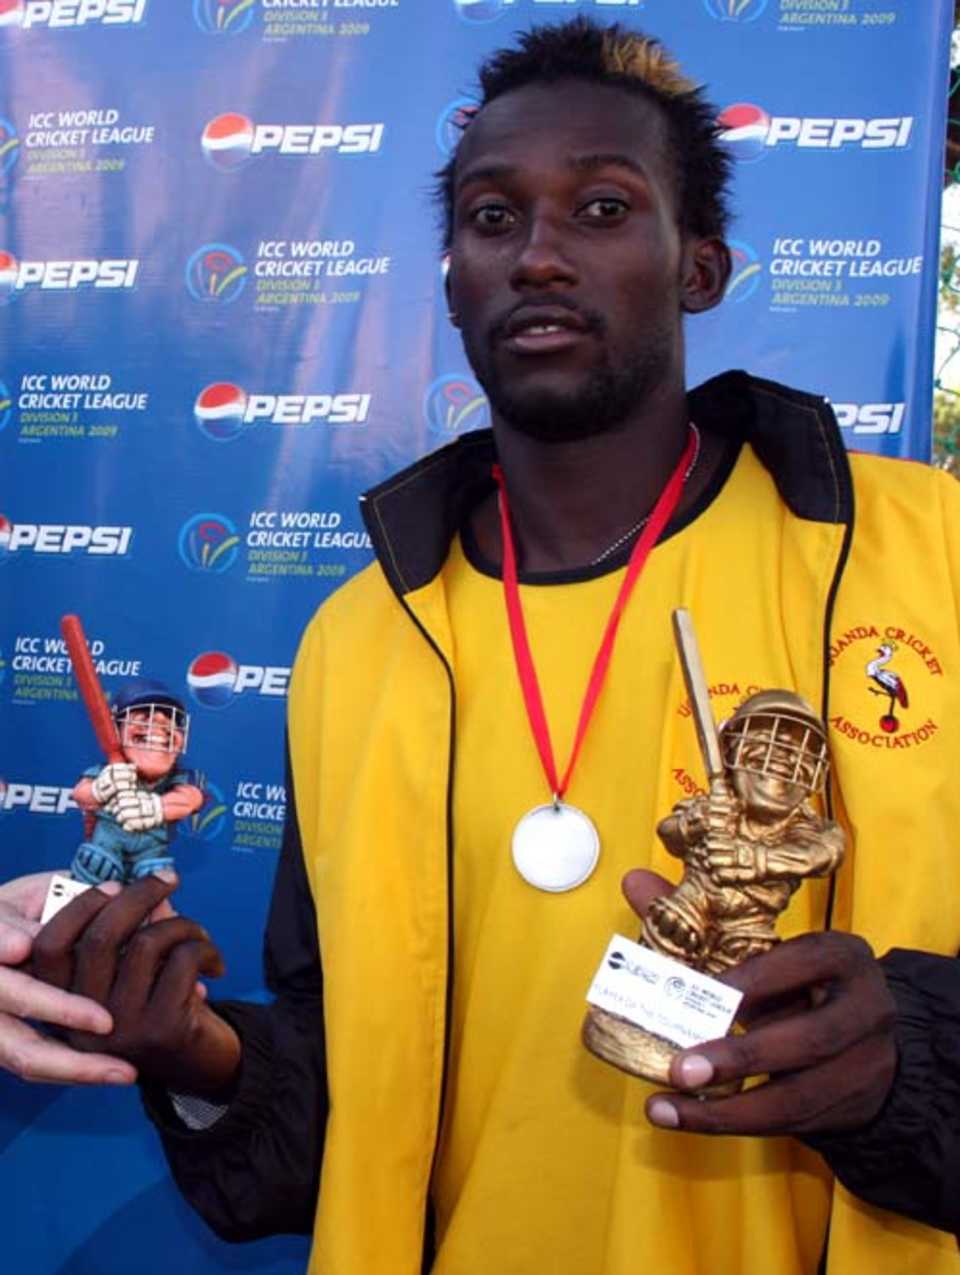 Uganda's Kenneth Kamuya was named Player of the Match and Player of the Tournament